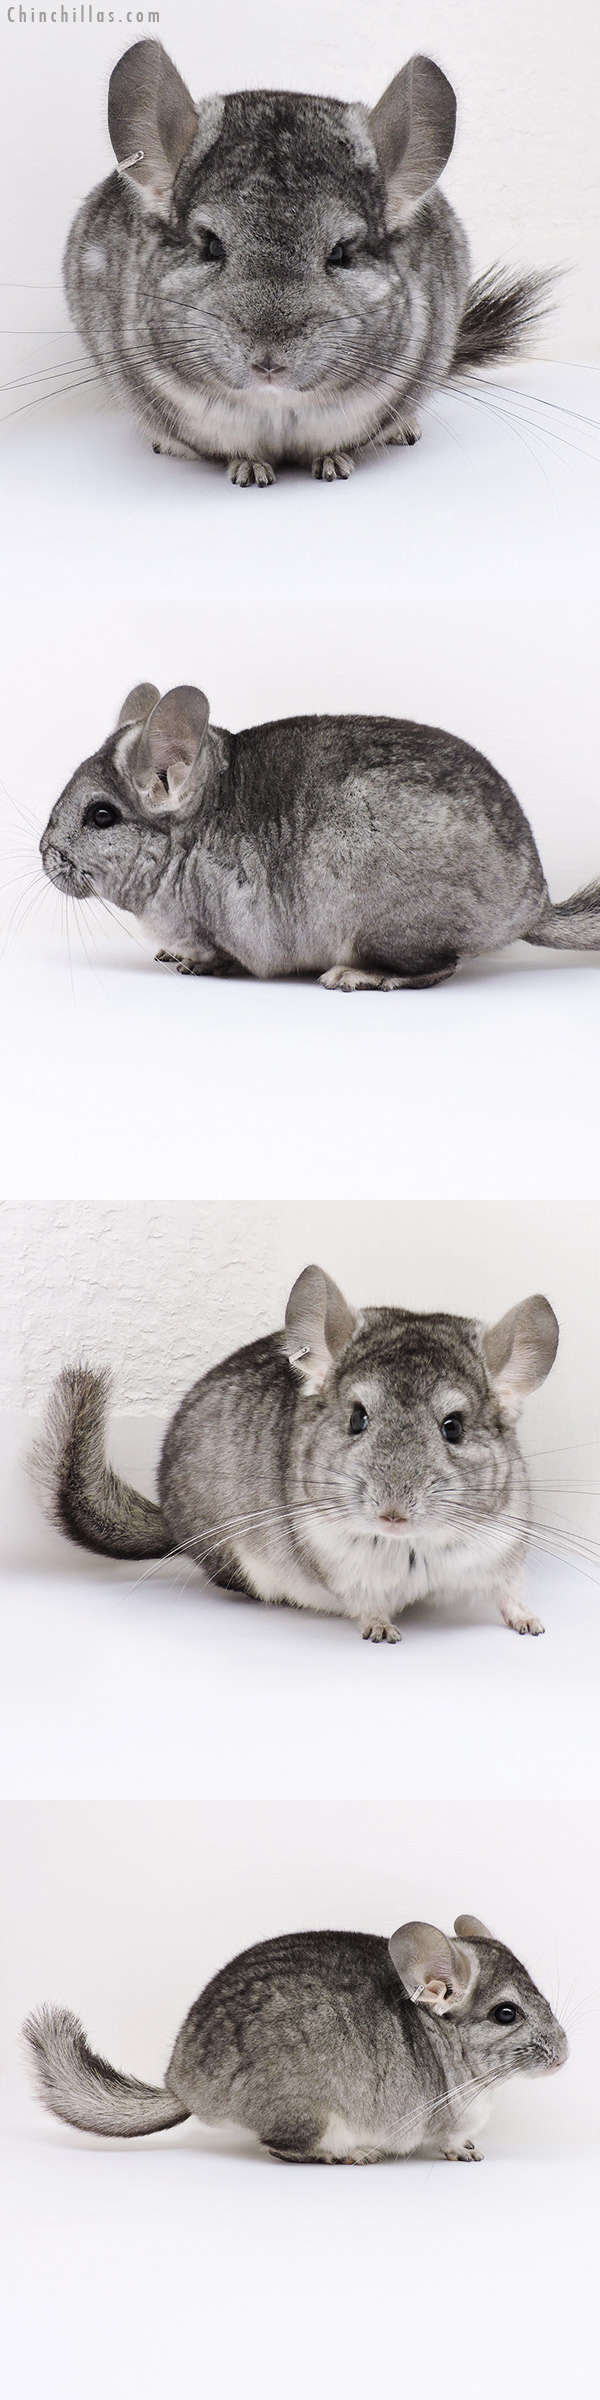 Chinchilla or related item offered for sale or export on Chinchillas.com - 16356 & 16365 Standard ( Royal Persian Angora & Violet Carrier) Pair